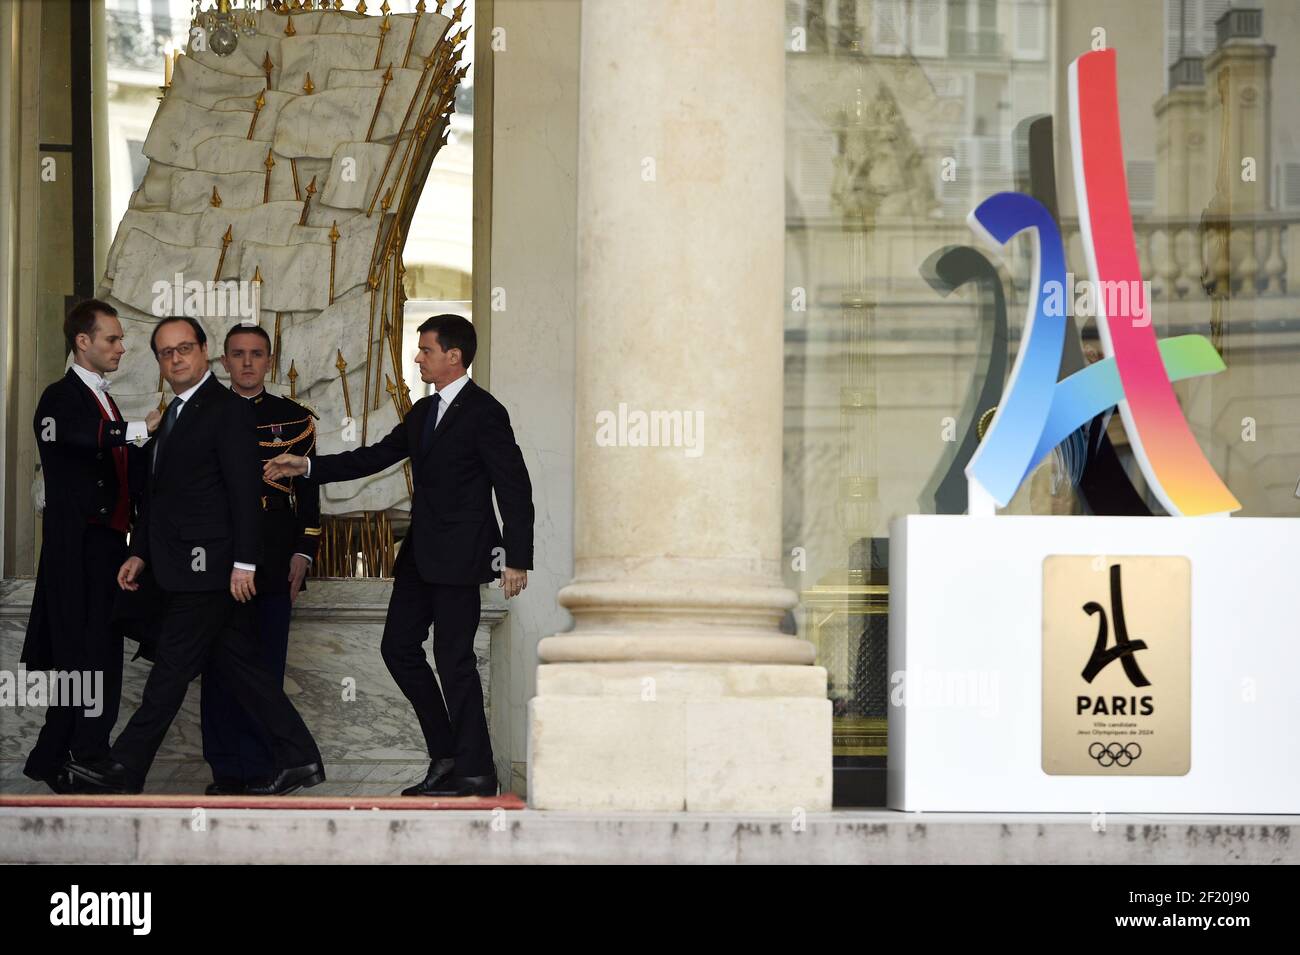 The president of the French Republic François Hollande and the prime minister Emmanuel Valls walk after the Council of Ministers, the campaign's official logo of the Paris bid to host the 2024 Olympic Games is seen on the Palais de l'Elysee, in Paris on February 17, 2016 - Photo Philippe Millereau / KMSP / DPPI Stock Photo